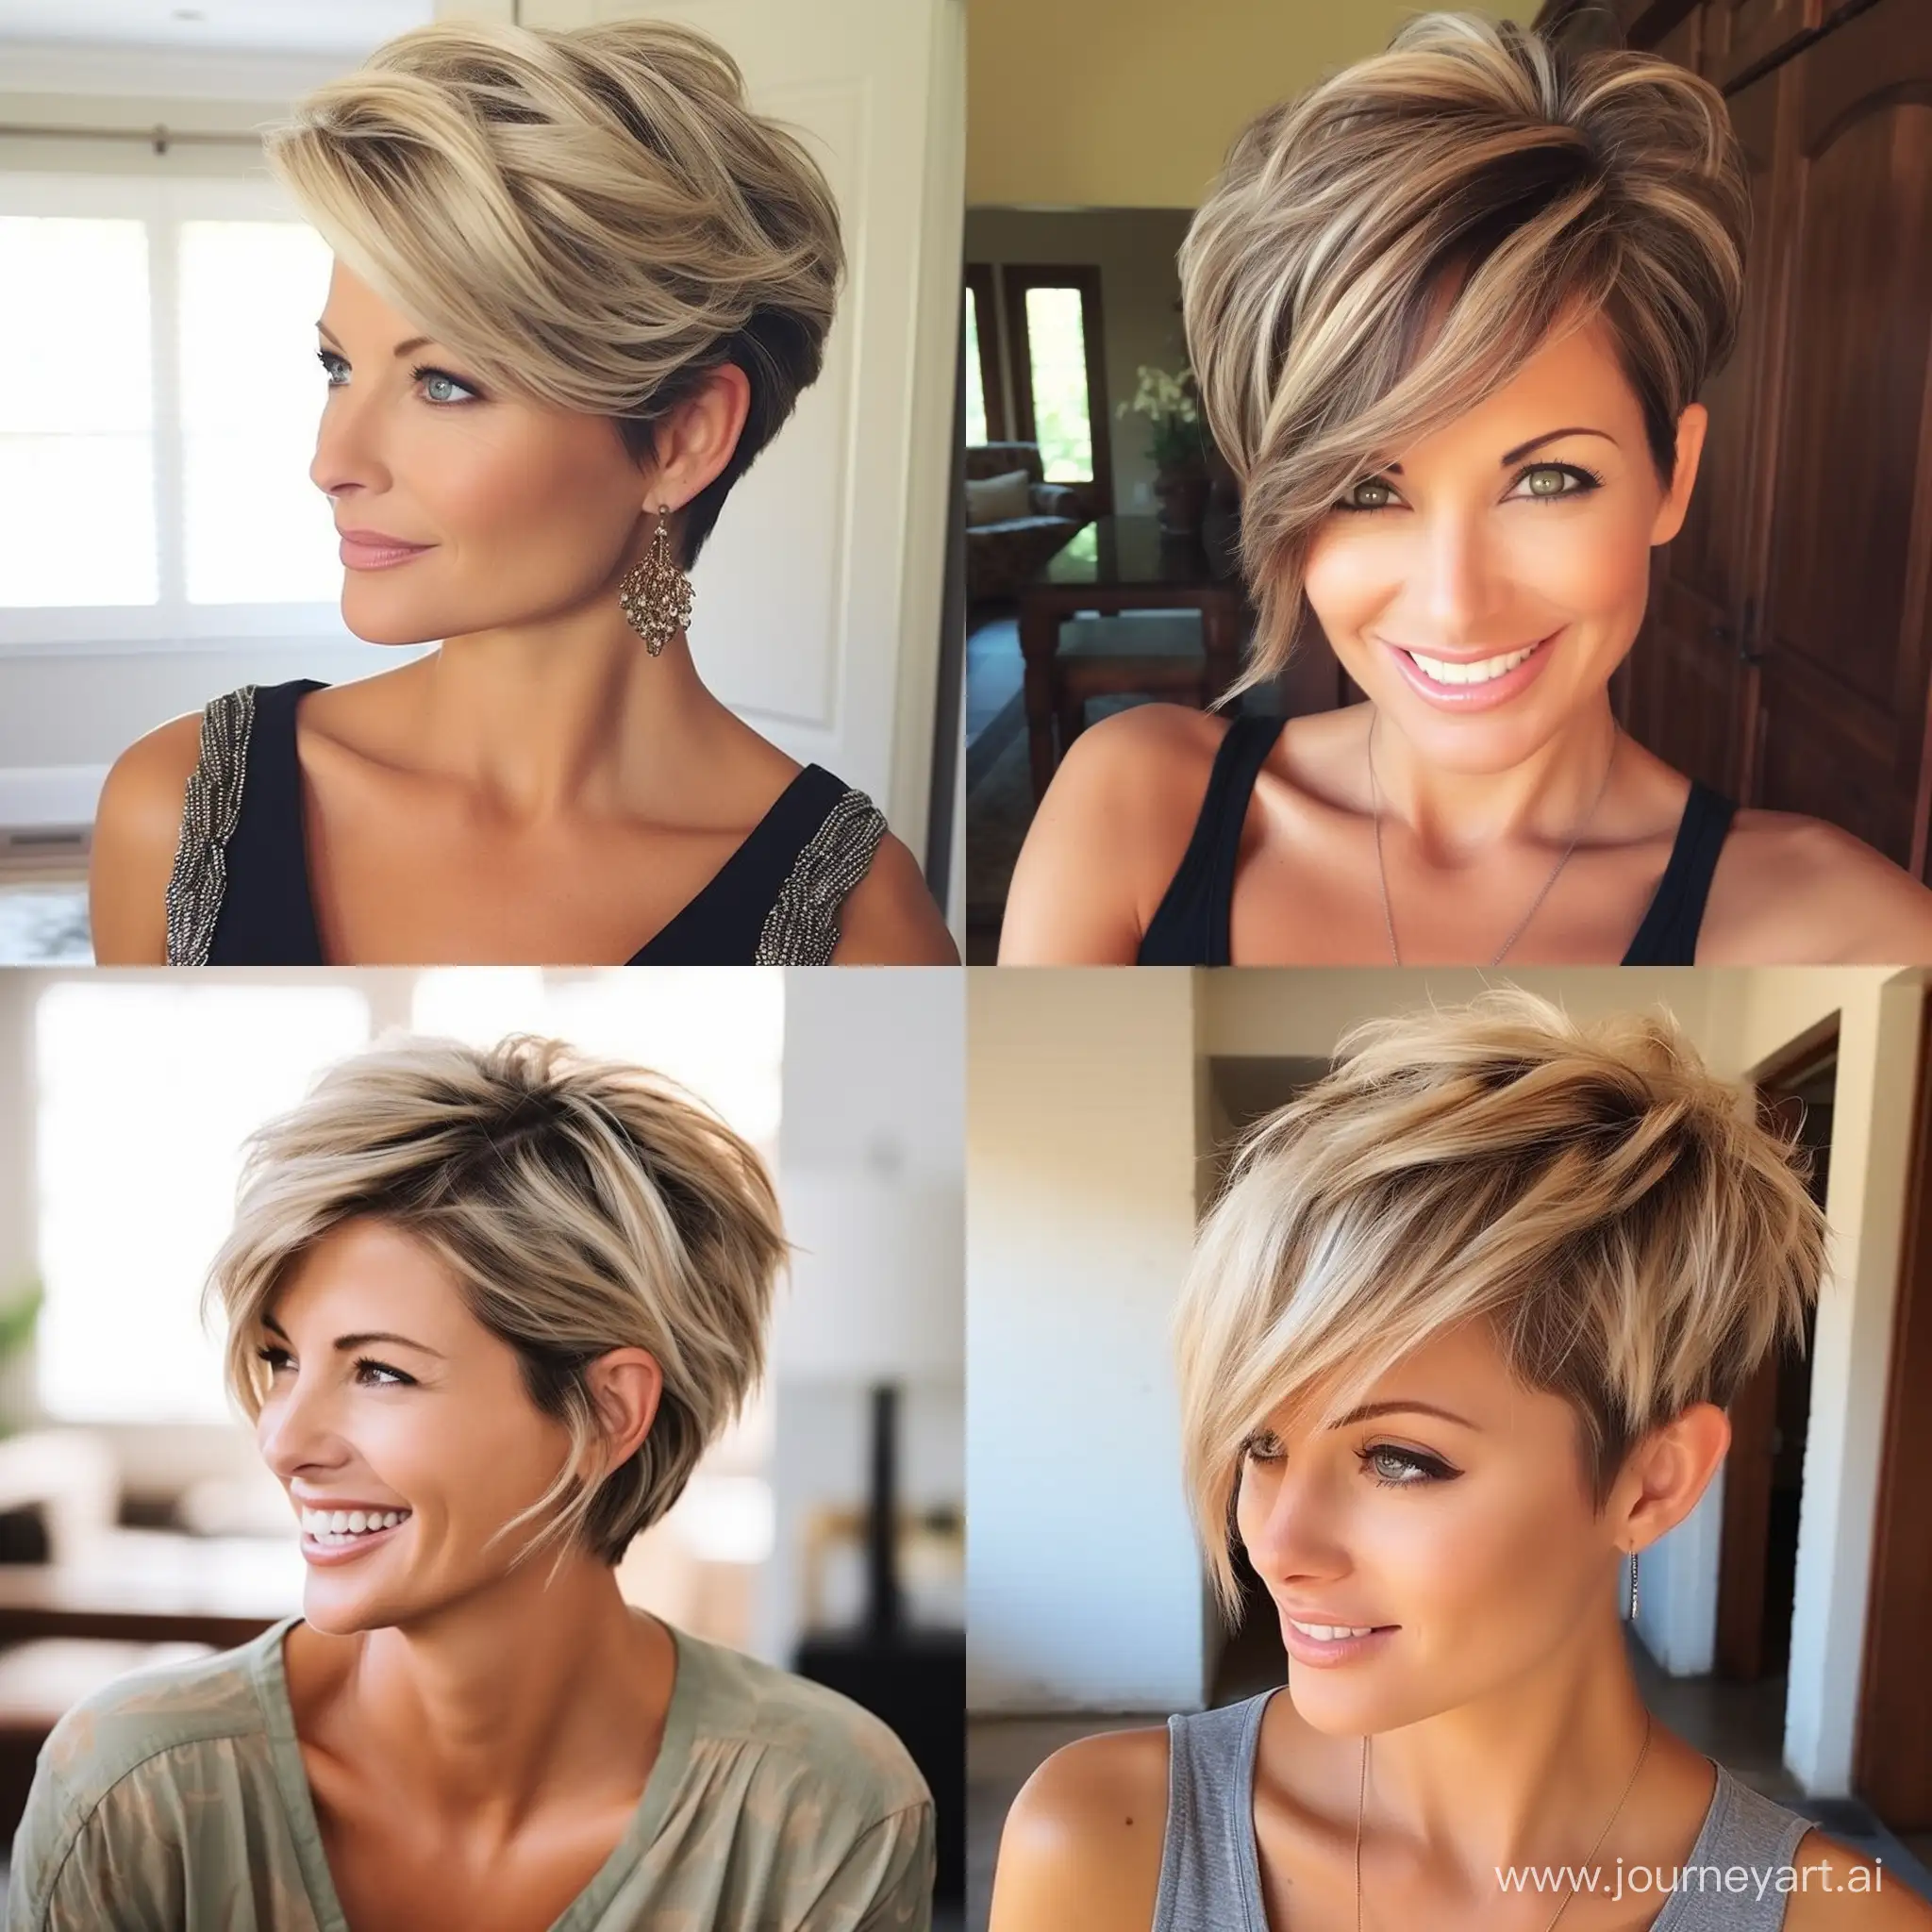 Chic-Short-Hairstyles-for-Women-Over-40